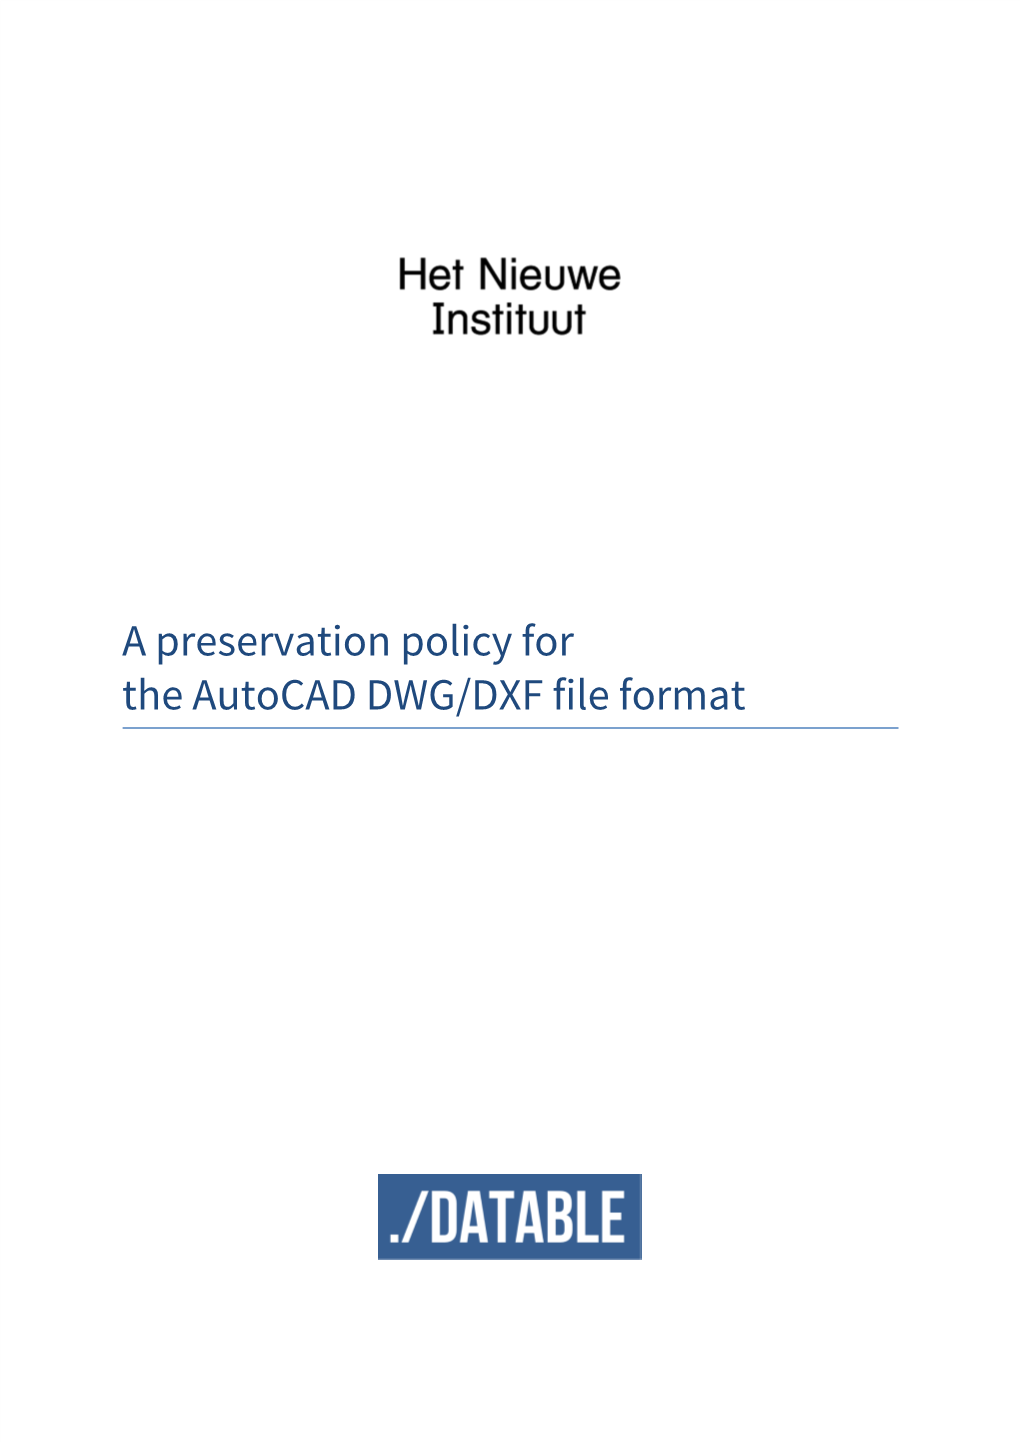 A Preservation Policy for the Autocad DWG/DXF File Format